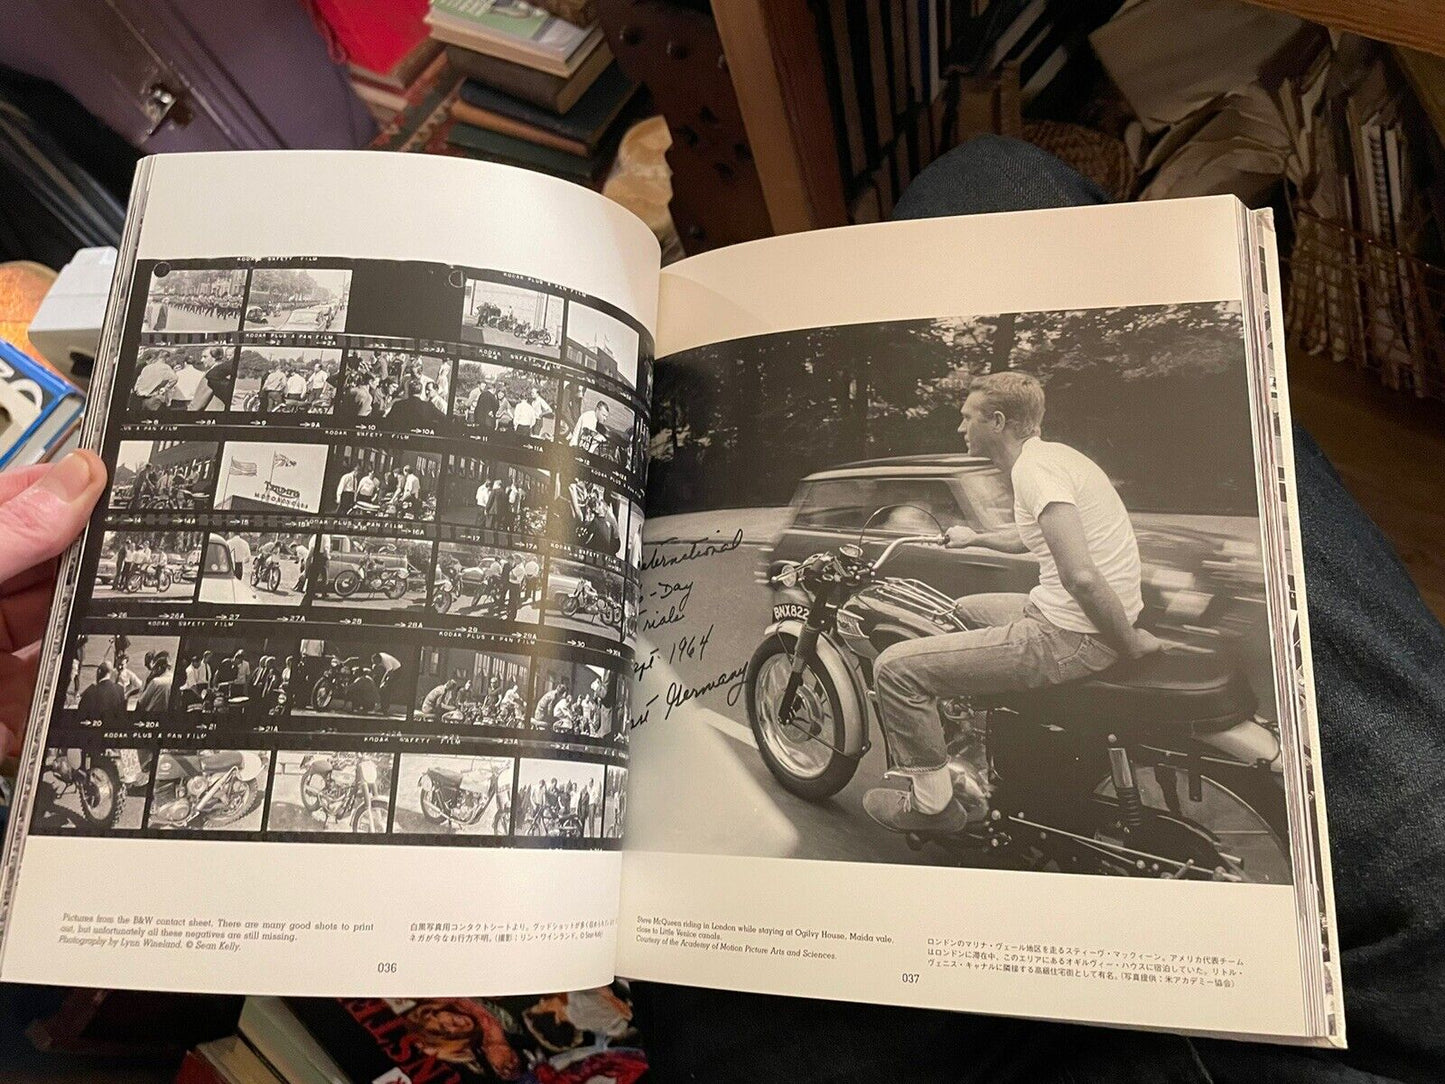 Steve McQueen 40 Summers Ago SIGNED BY MCQUEENS SON etc Motorcycles Hollywood